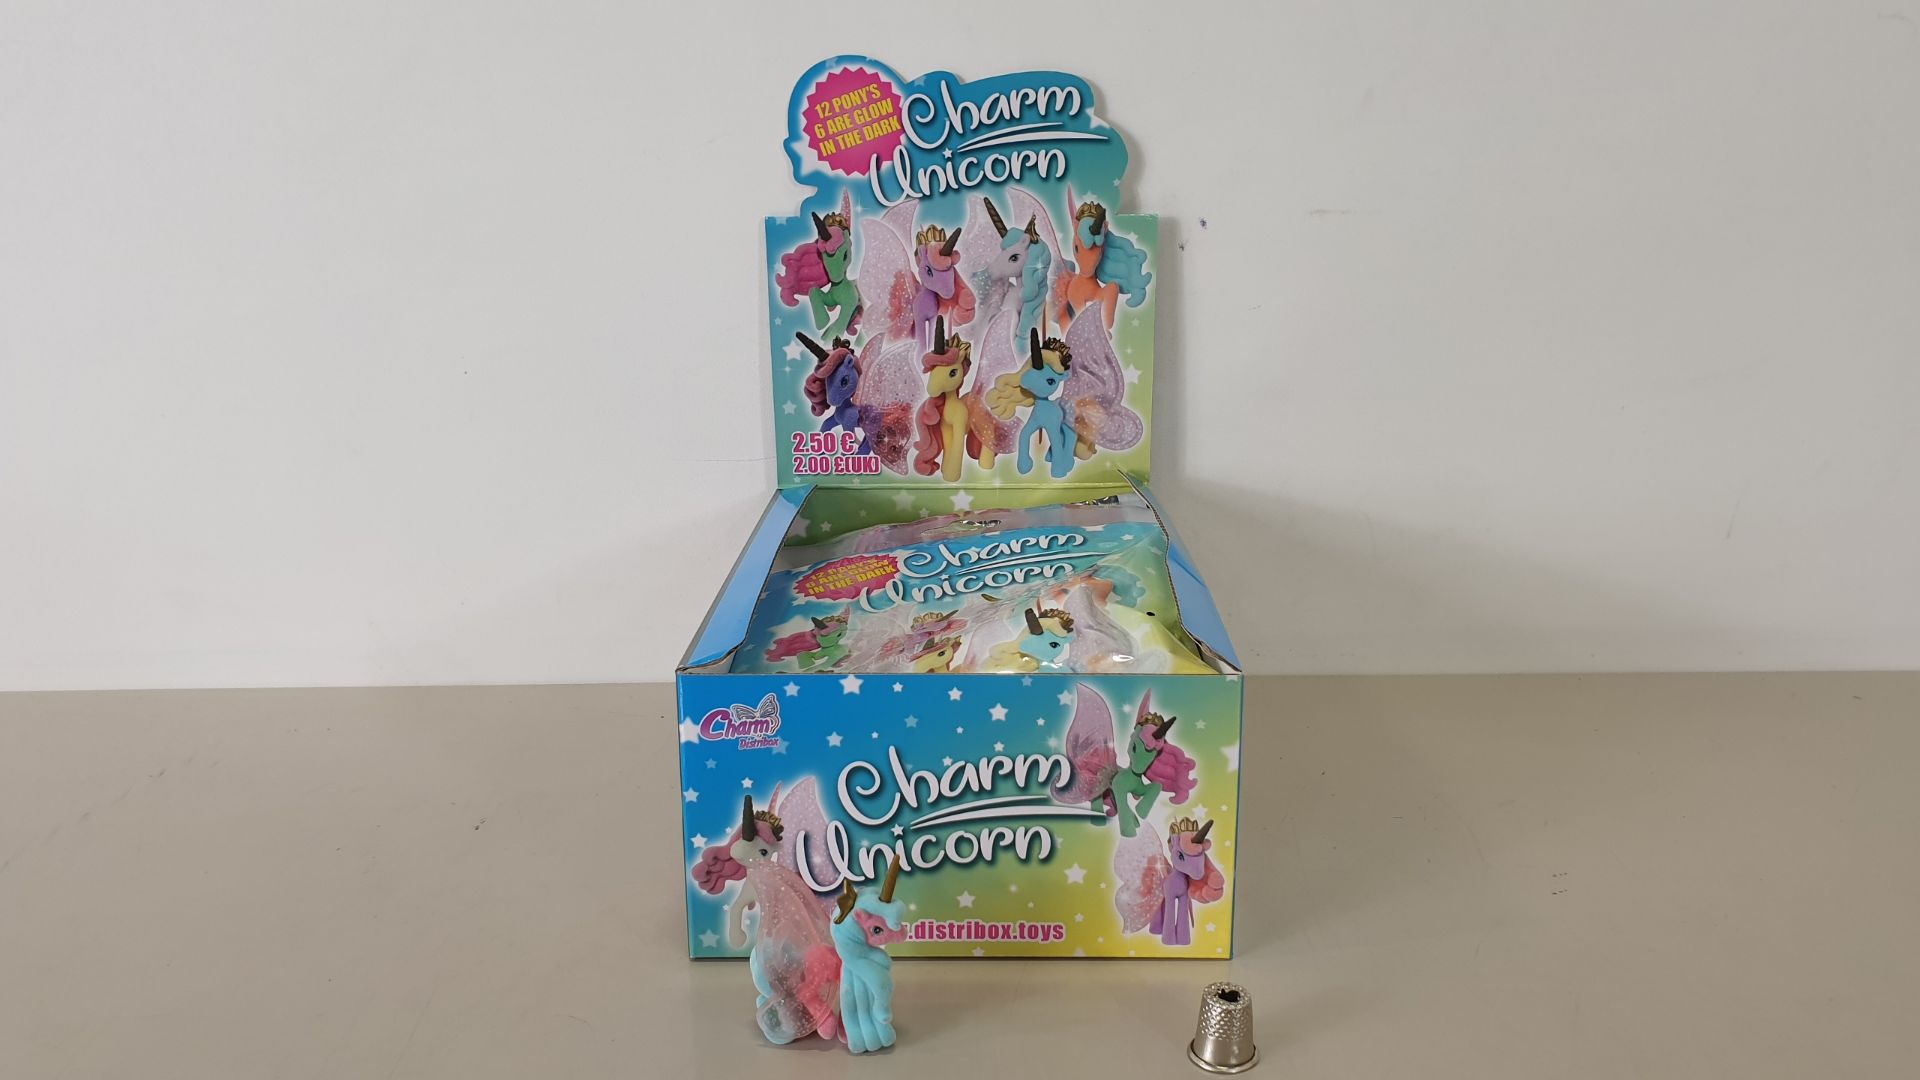 360 X BRAND NEW INDIVIDUALLY PACKAGED CHIQUI CHARM UNICORNS - 30 X 12 POINT OF SALE DISPLAY